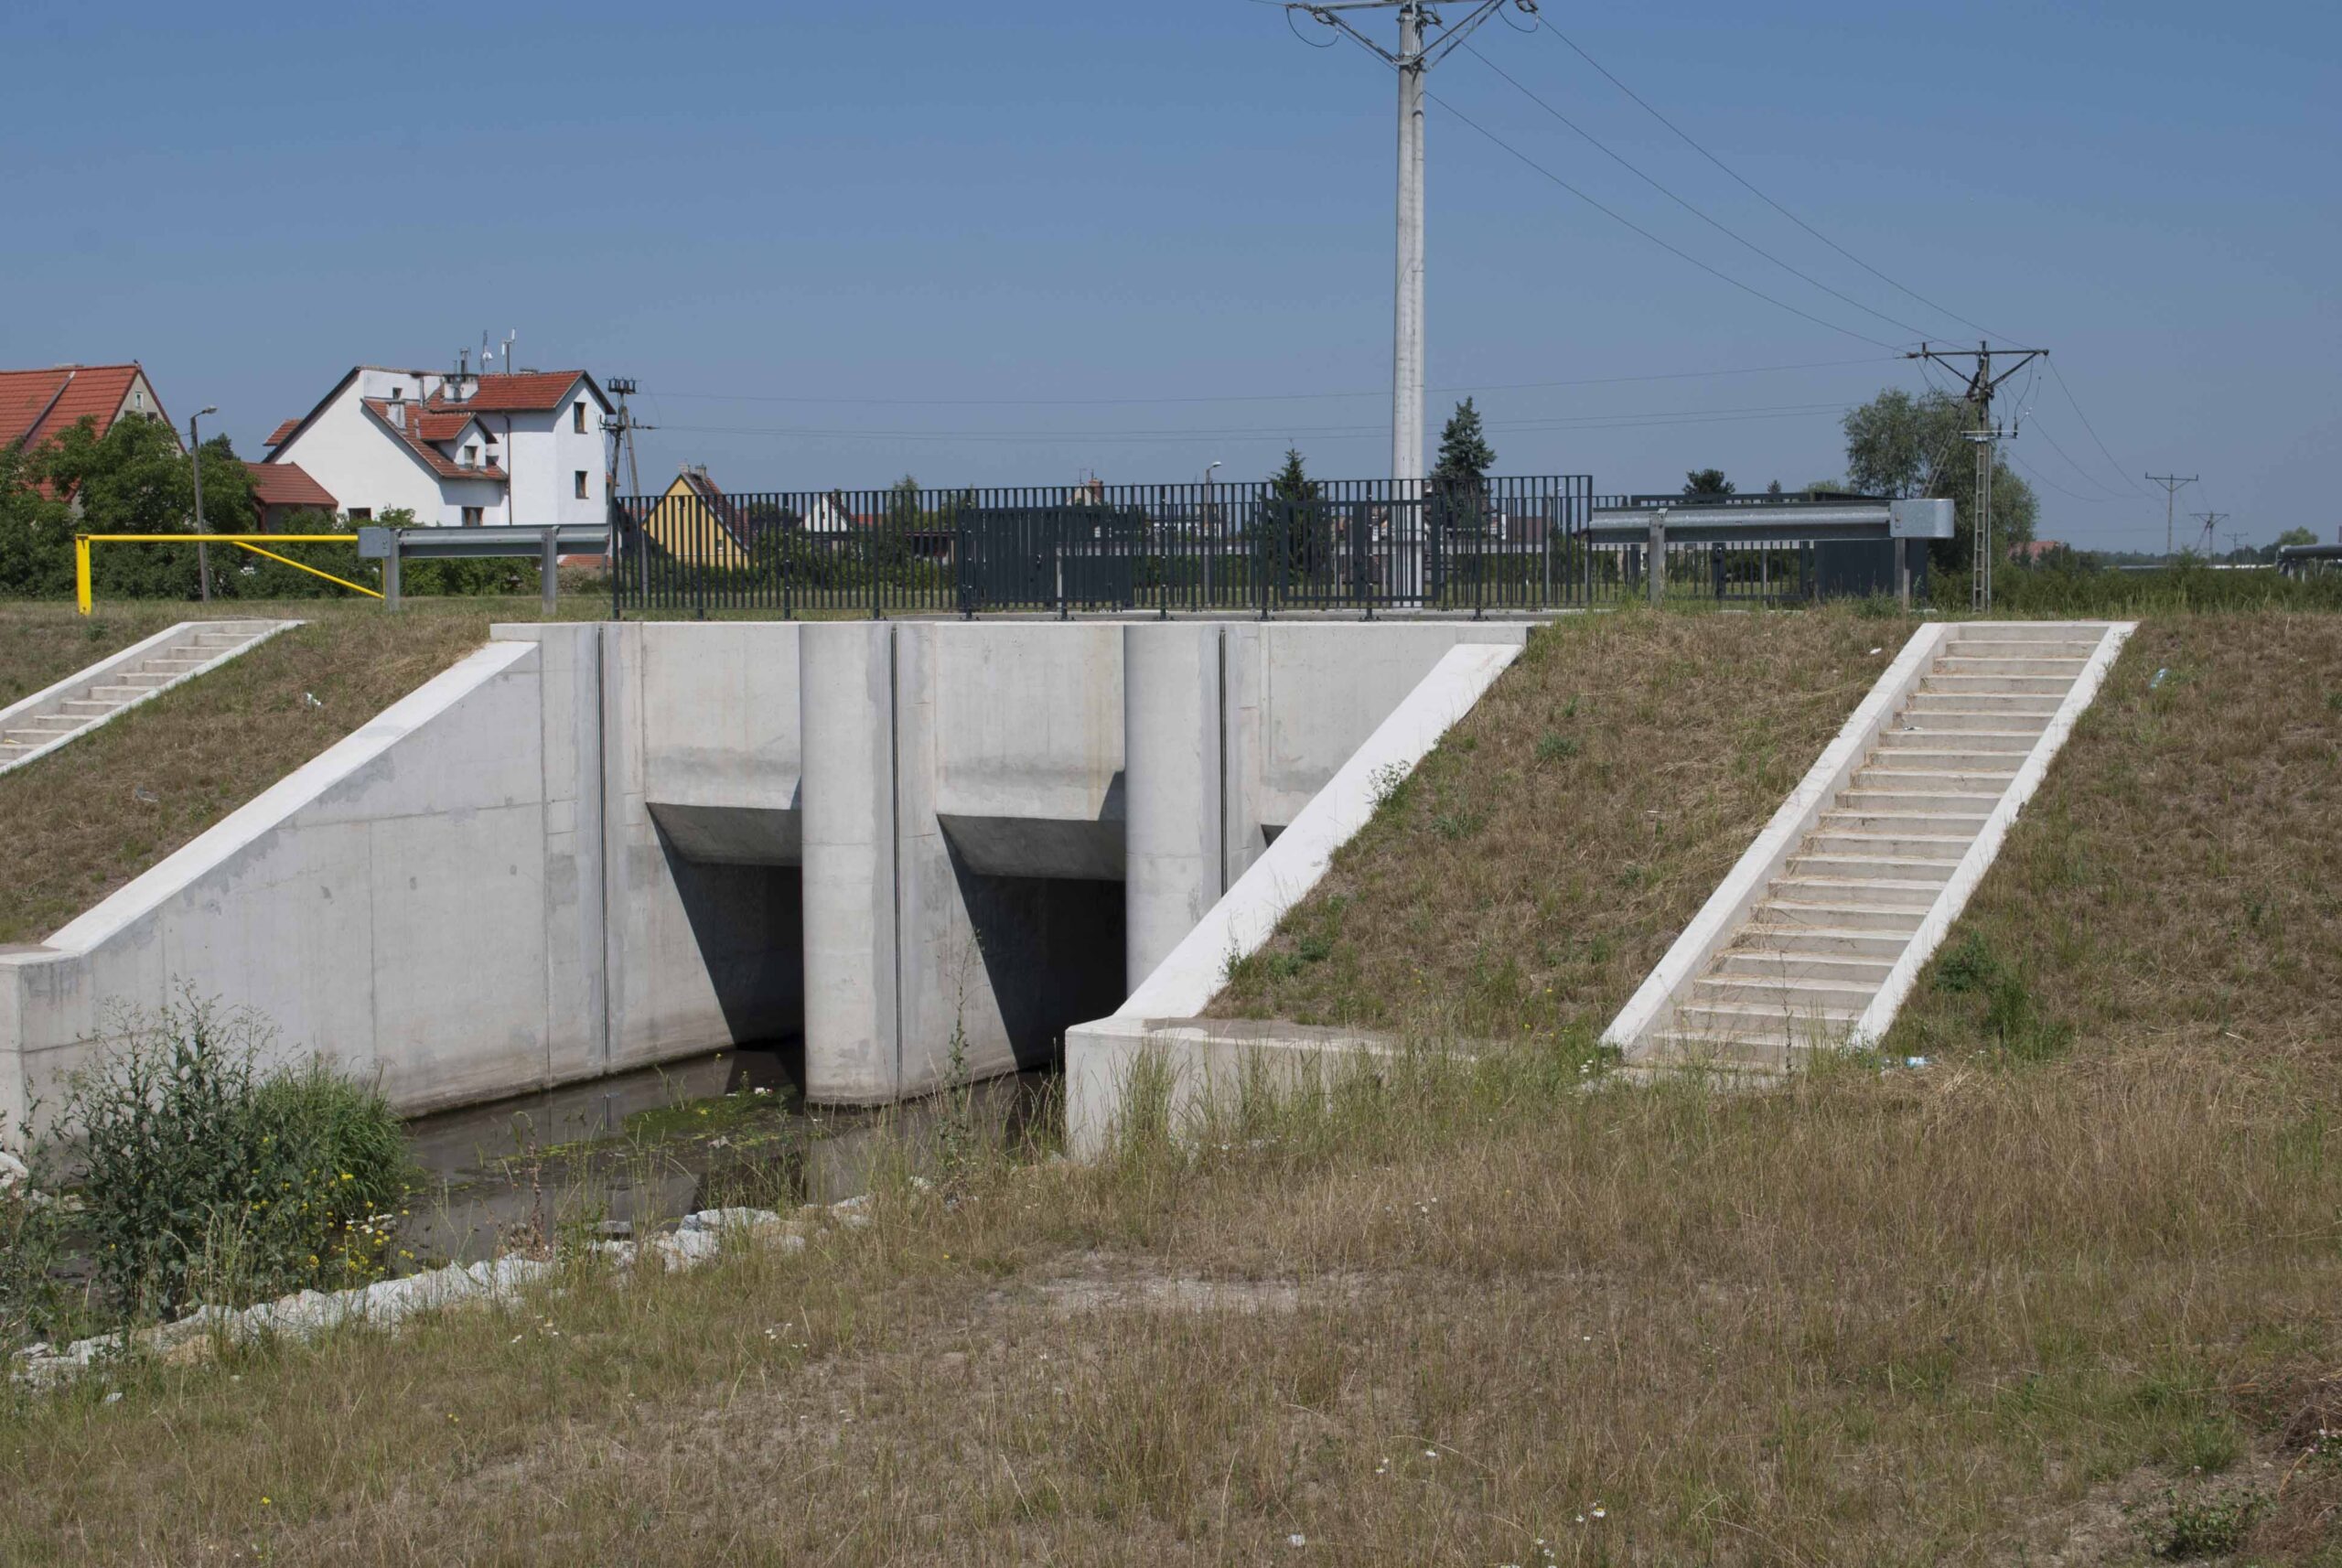 MODERNISATION OF THE WROCŁAW WATER SYSTEM WORLD BANK PROJECT